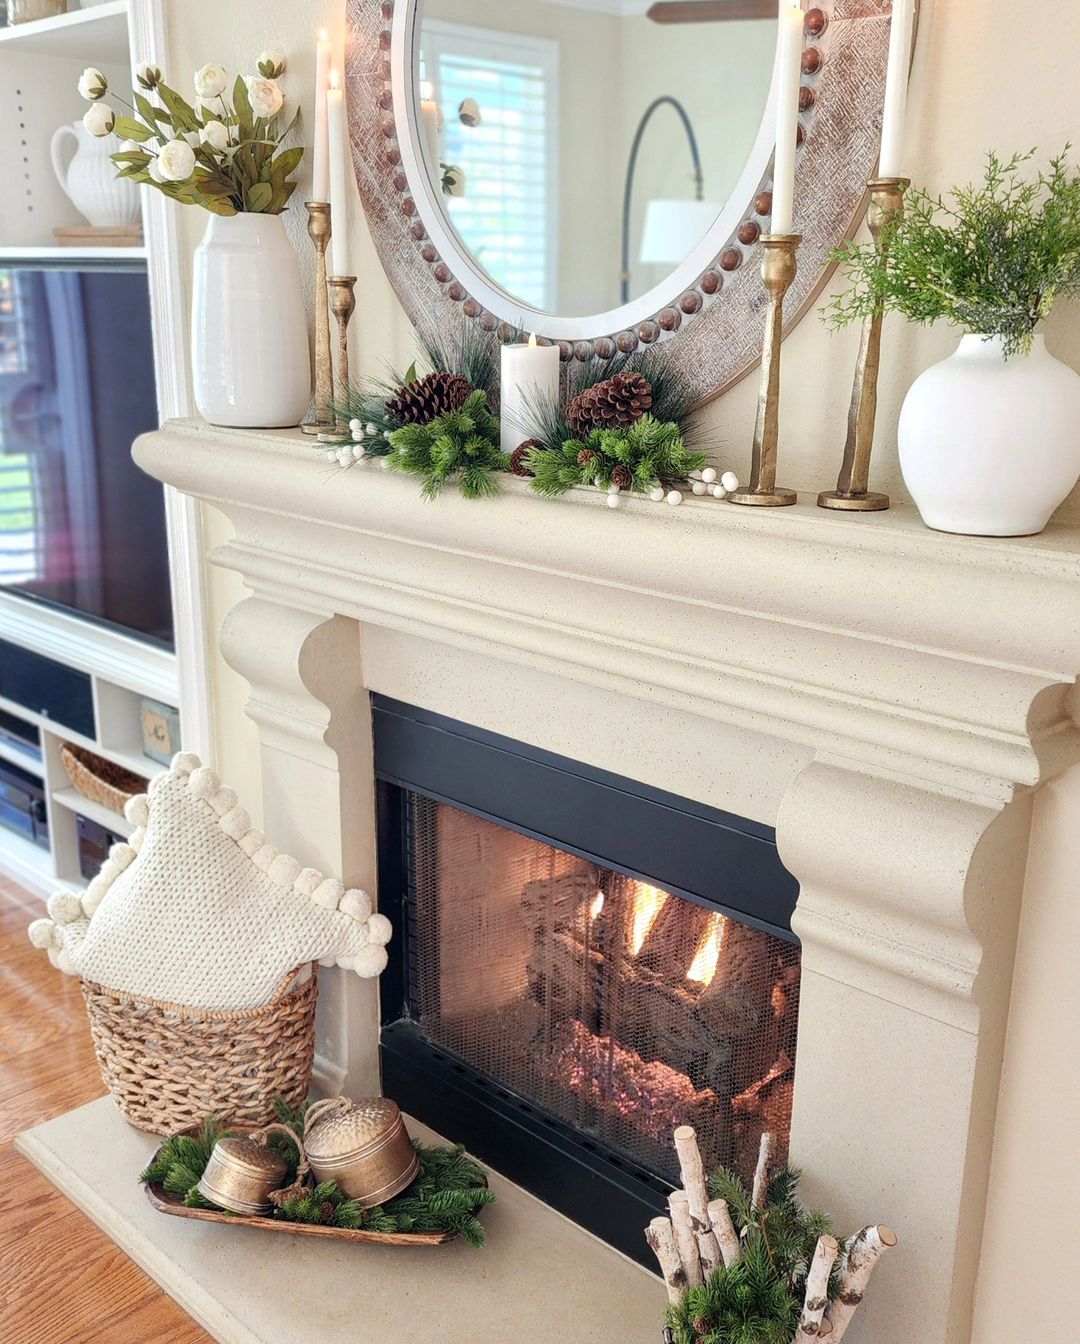 mantel decor with seasonal accents such as birch and pinecones enhances this fireplace and mantel for the winter season